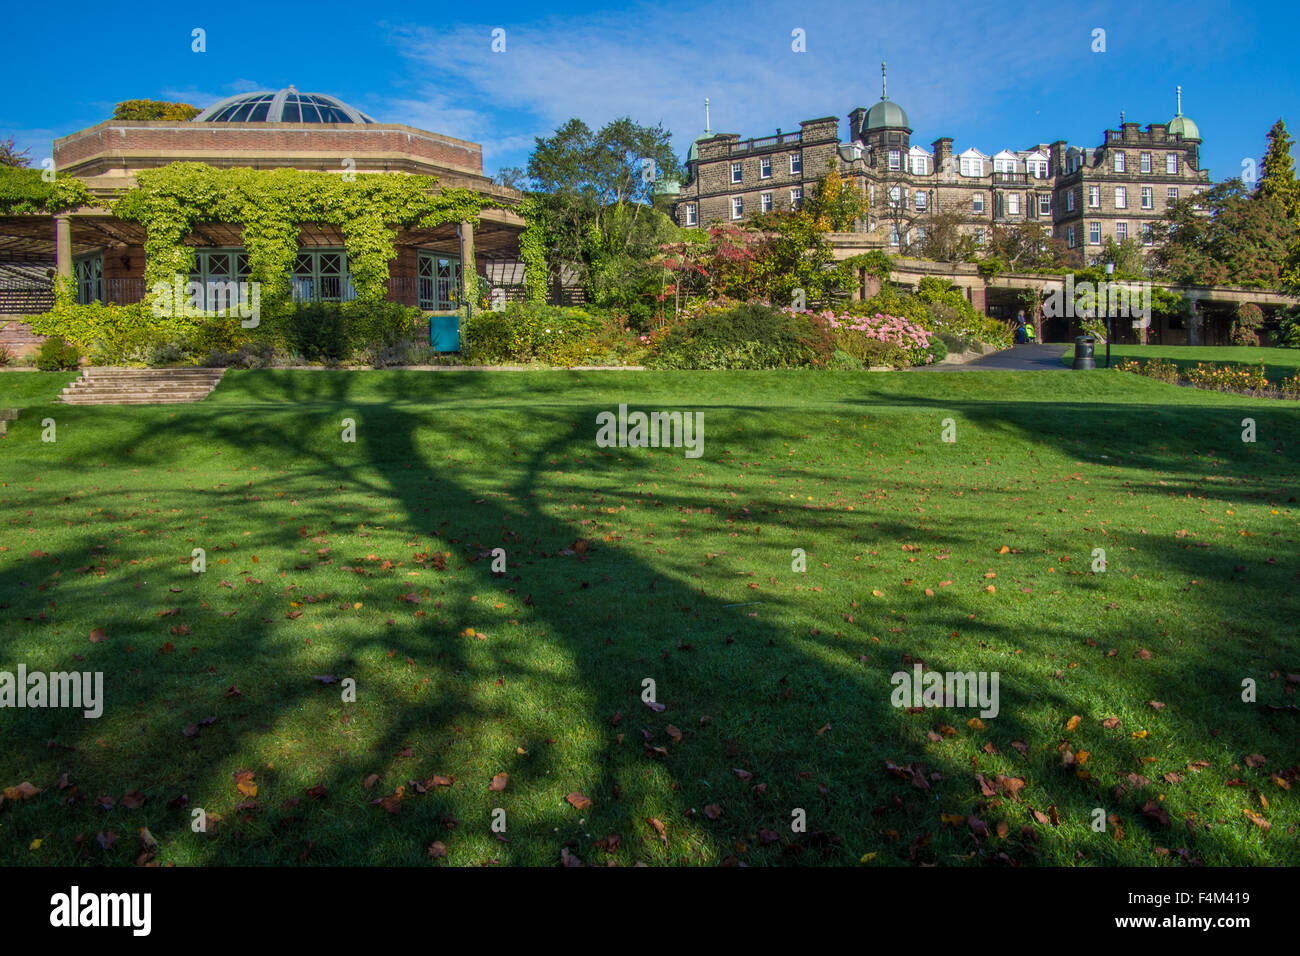 Valley Gardens, Harrogate, une ville thermale, North Yorkshire, Angleterre. Banque D'Images